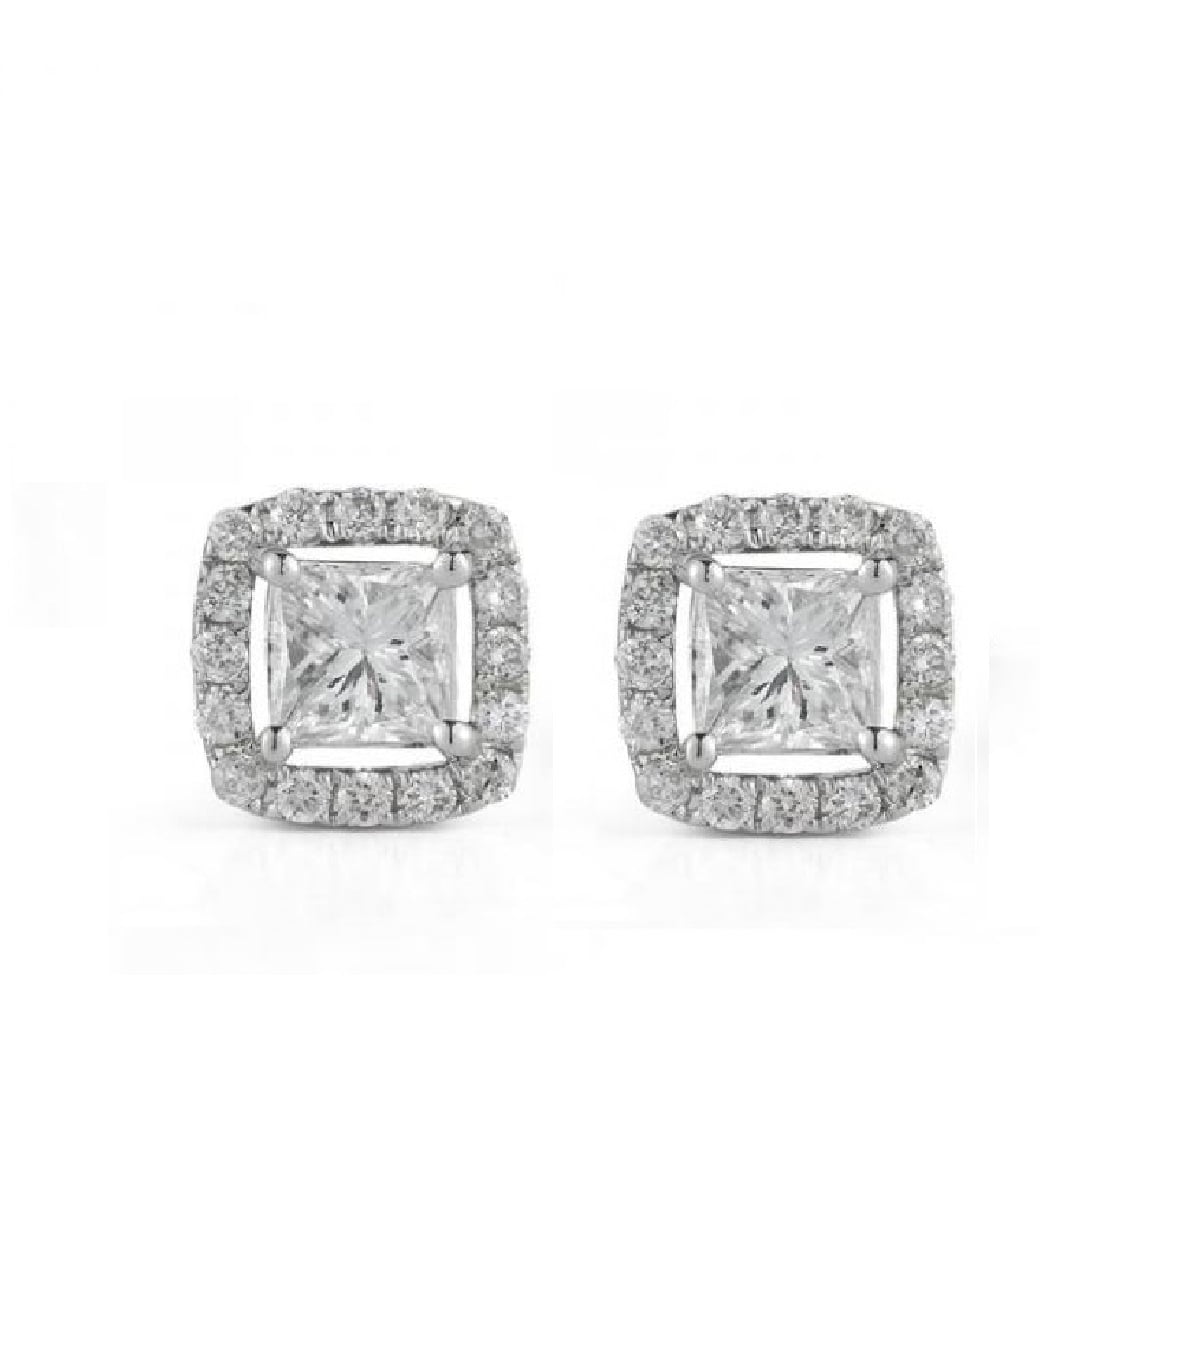 Luxsly - 14K White Gold Round Halo Diamond Studs with 1.75CT of Total ...